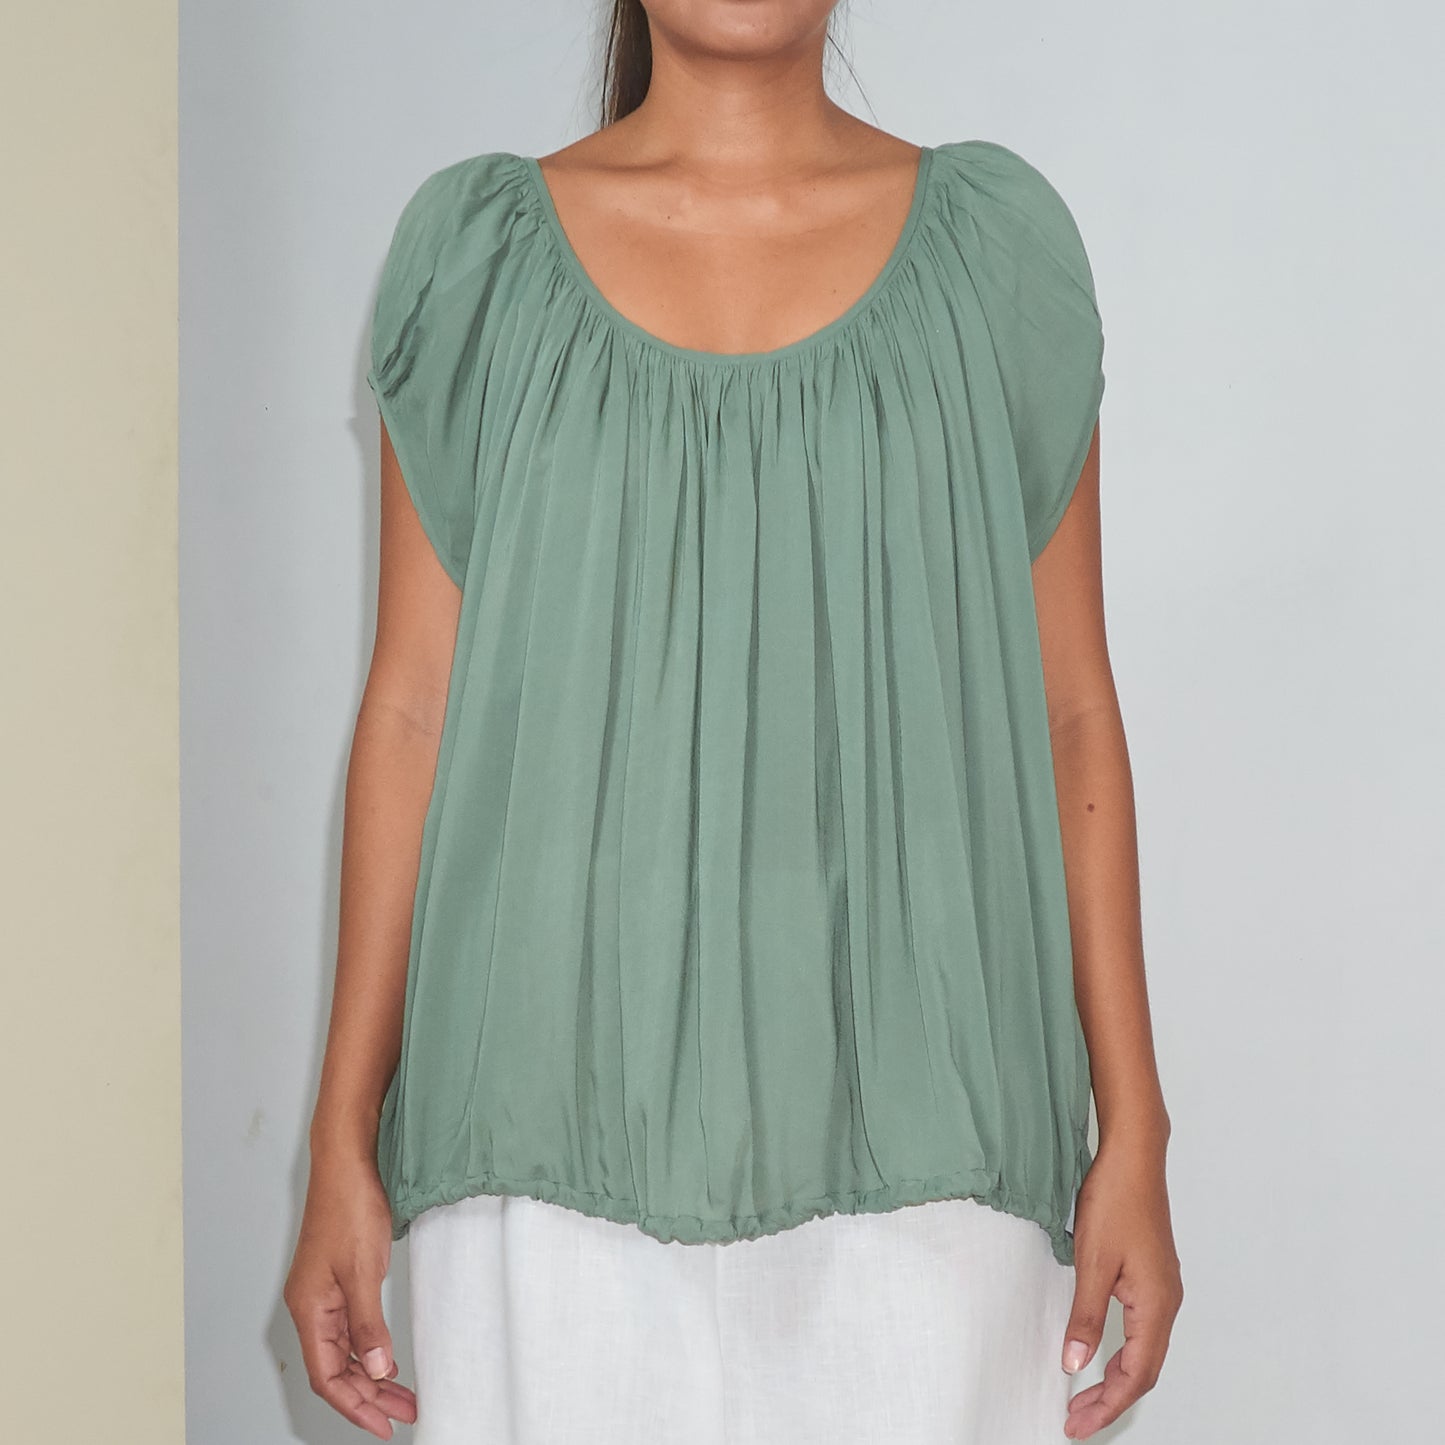 U-FLOW TOP - Rayon Voile | Light Olive Green